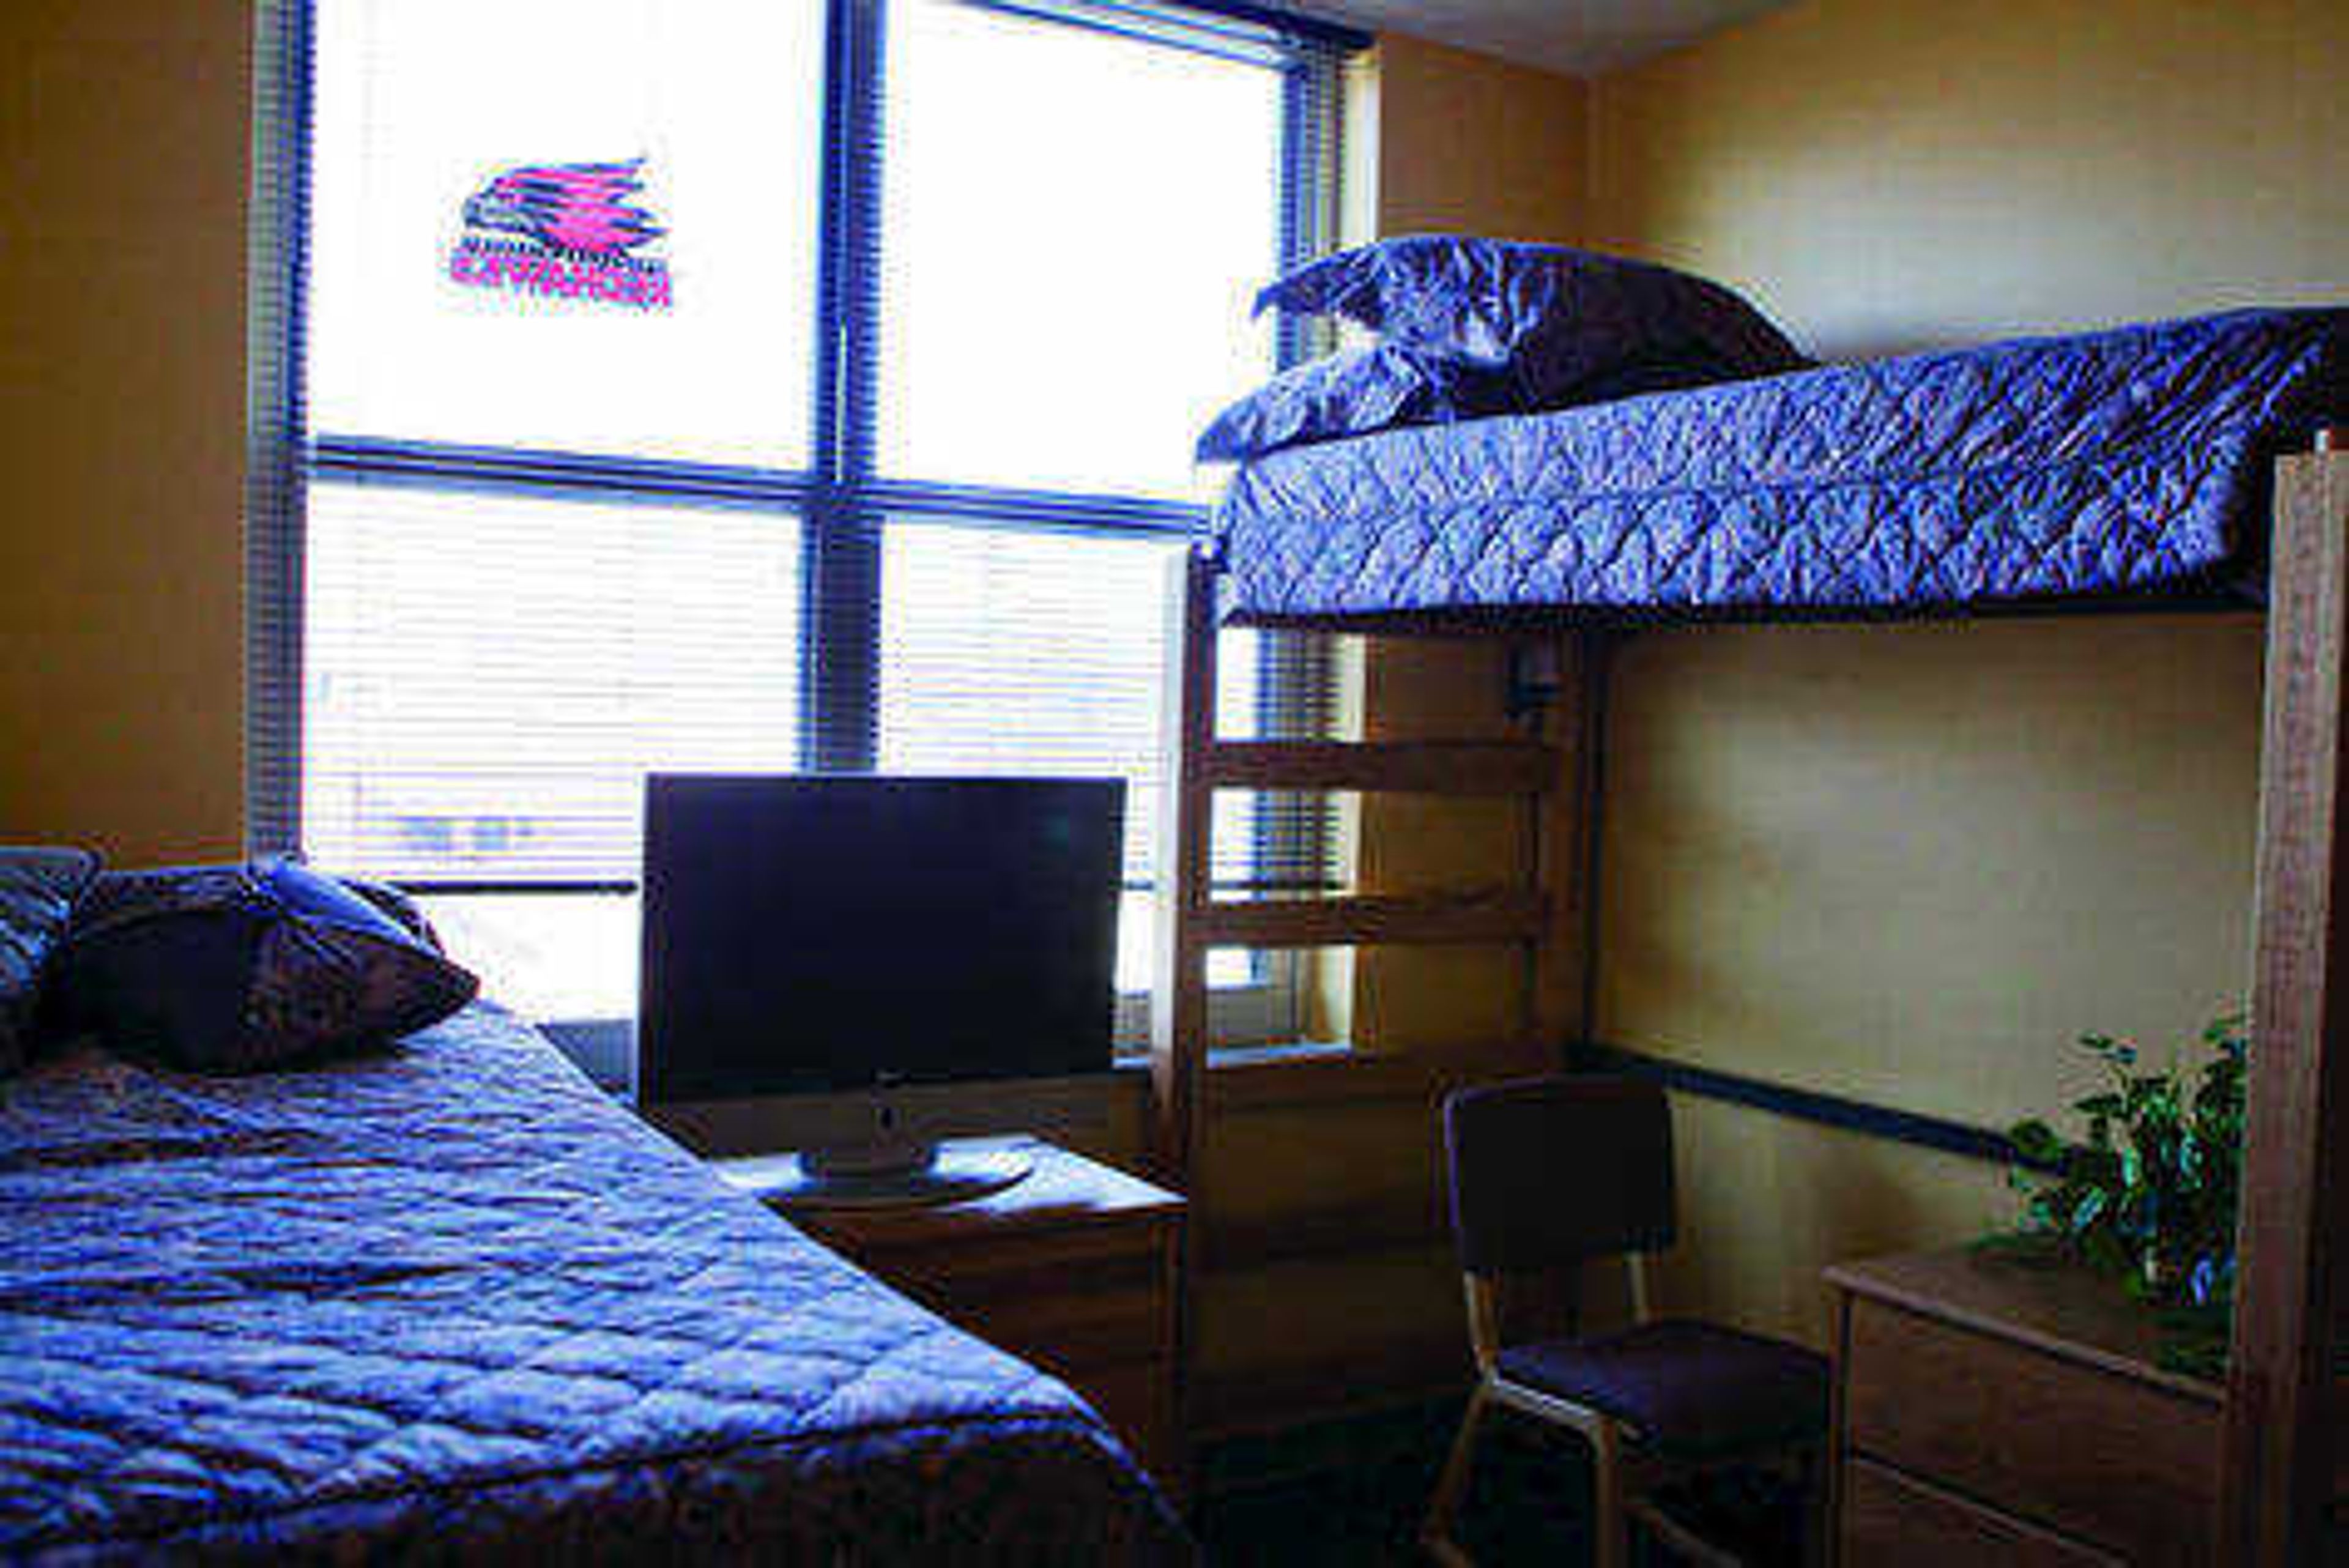 Southeast residence life rates change